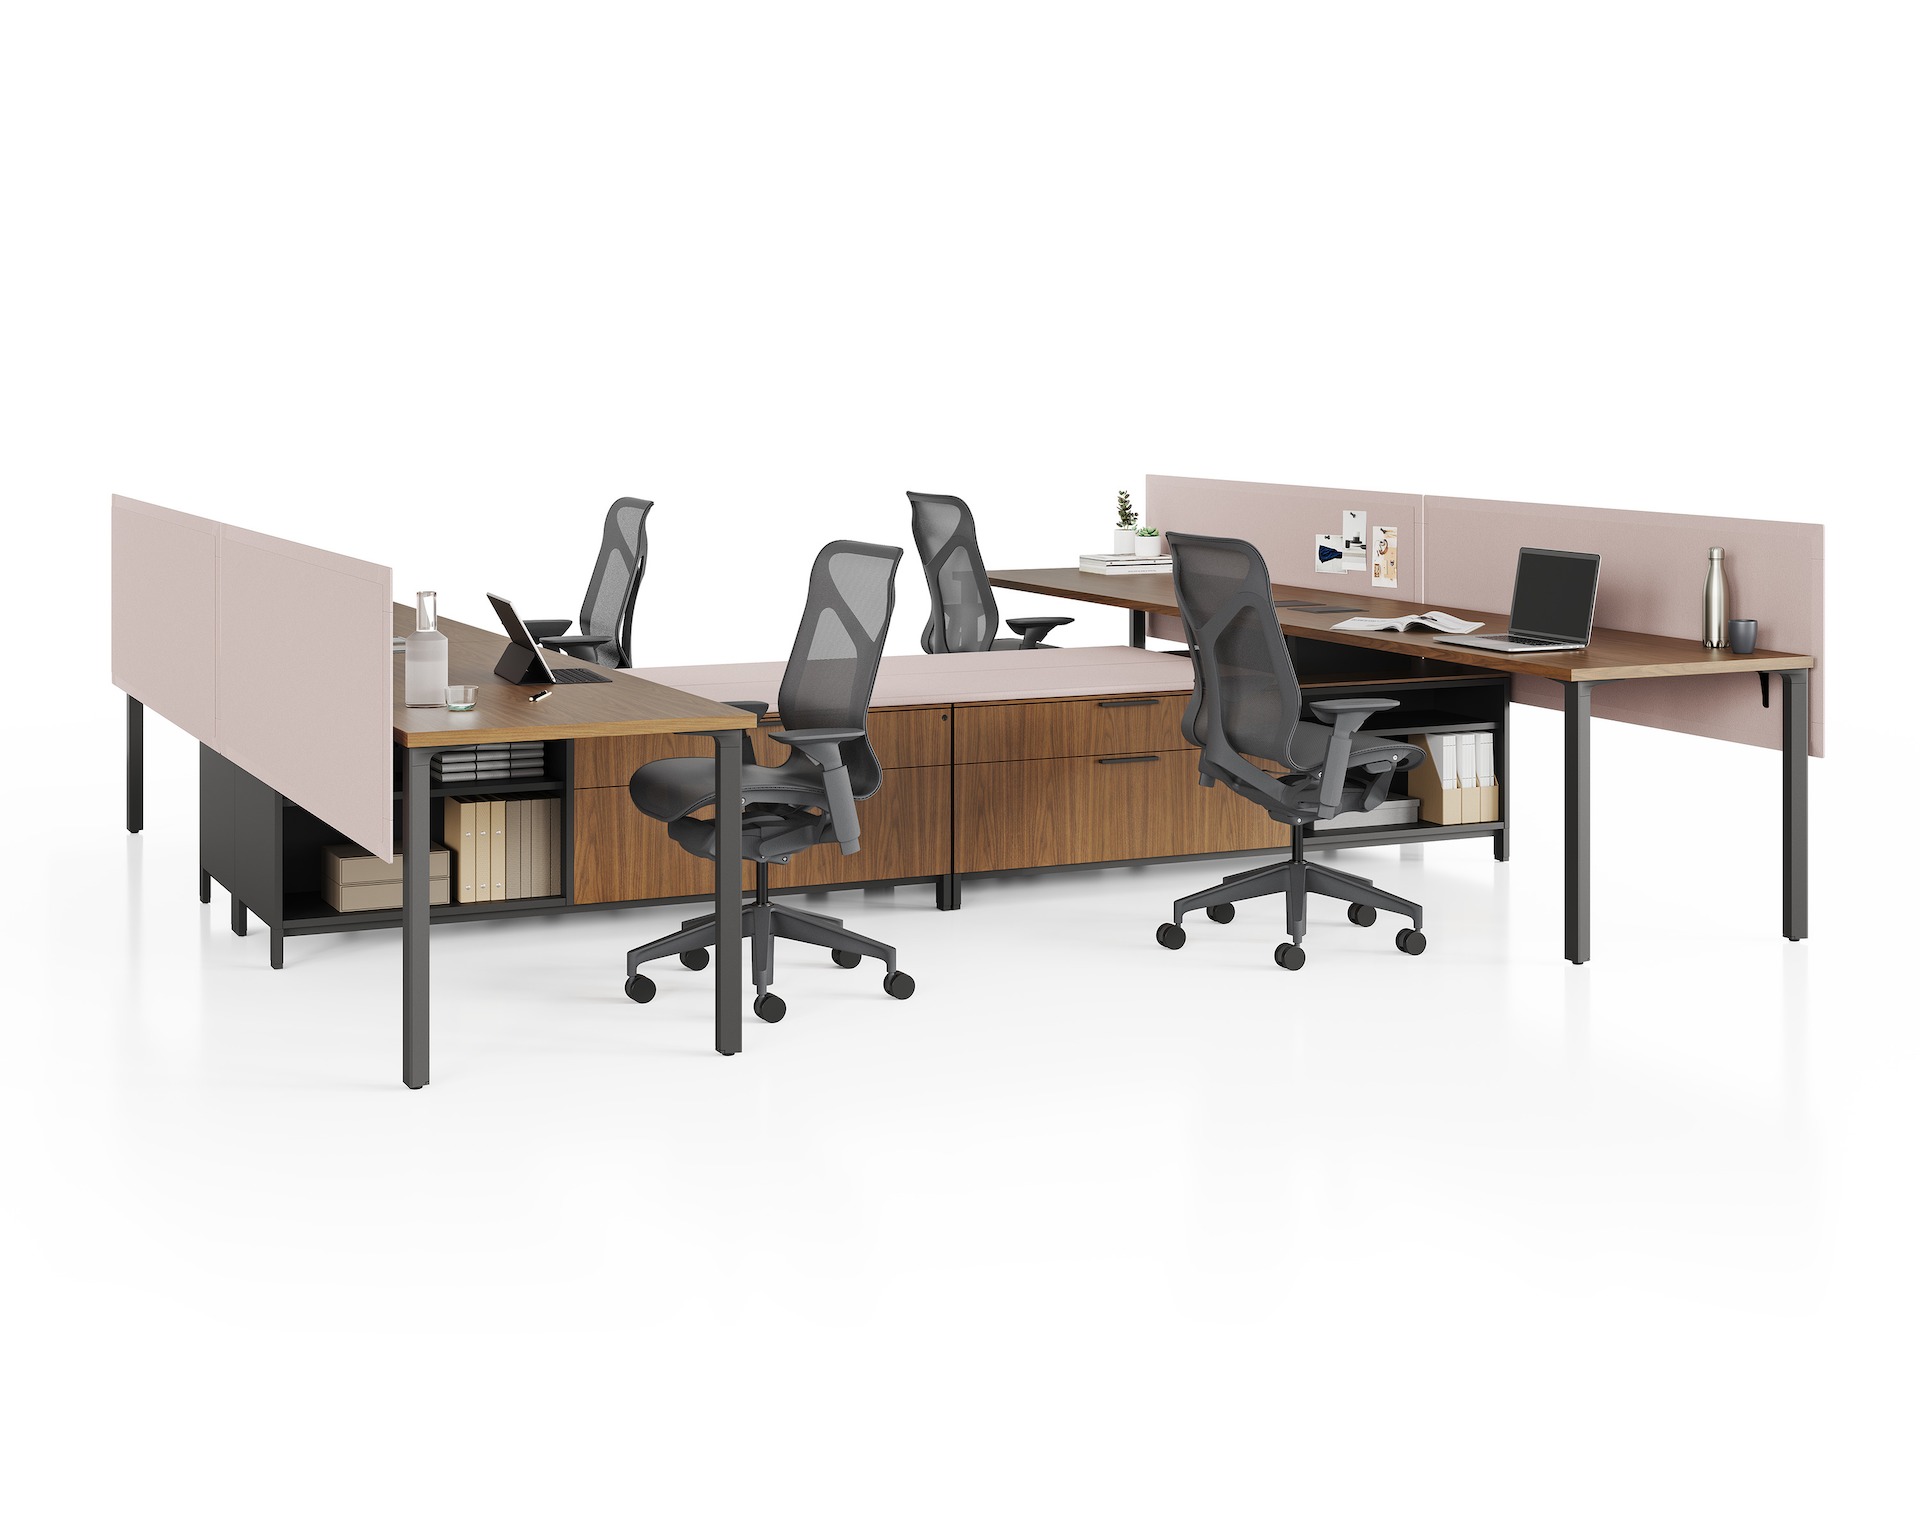 Group of four Canvas Storage workstations with wood surfaces, pink screens, and black Cosm Chairs.